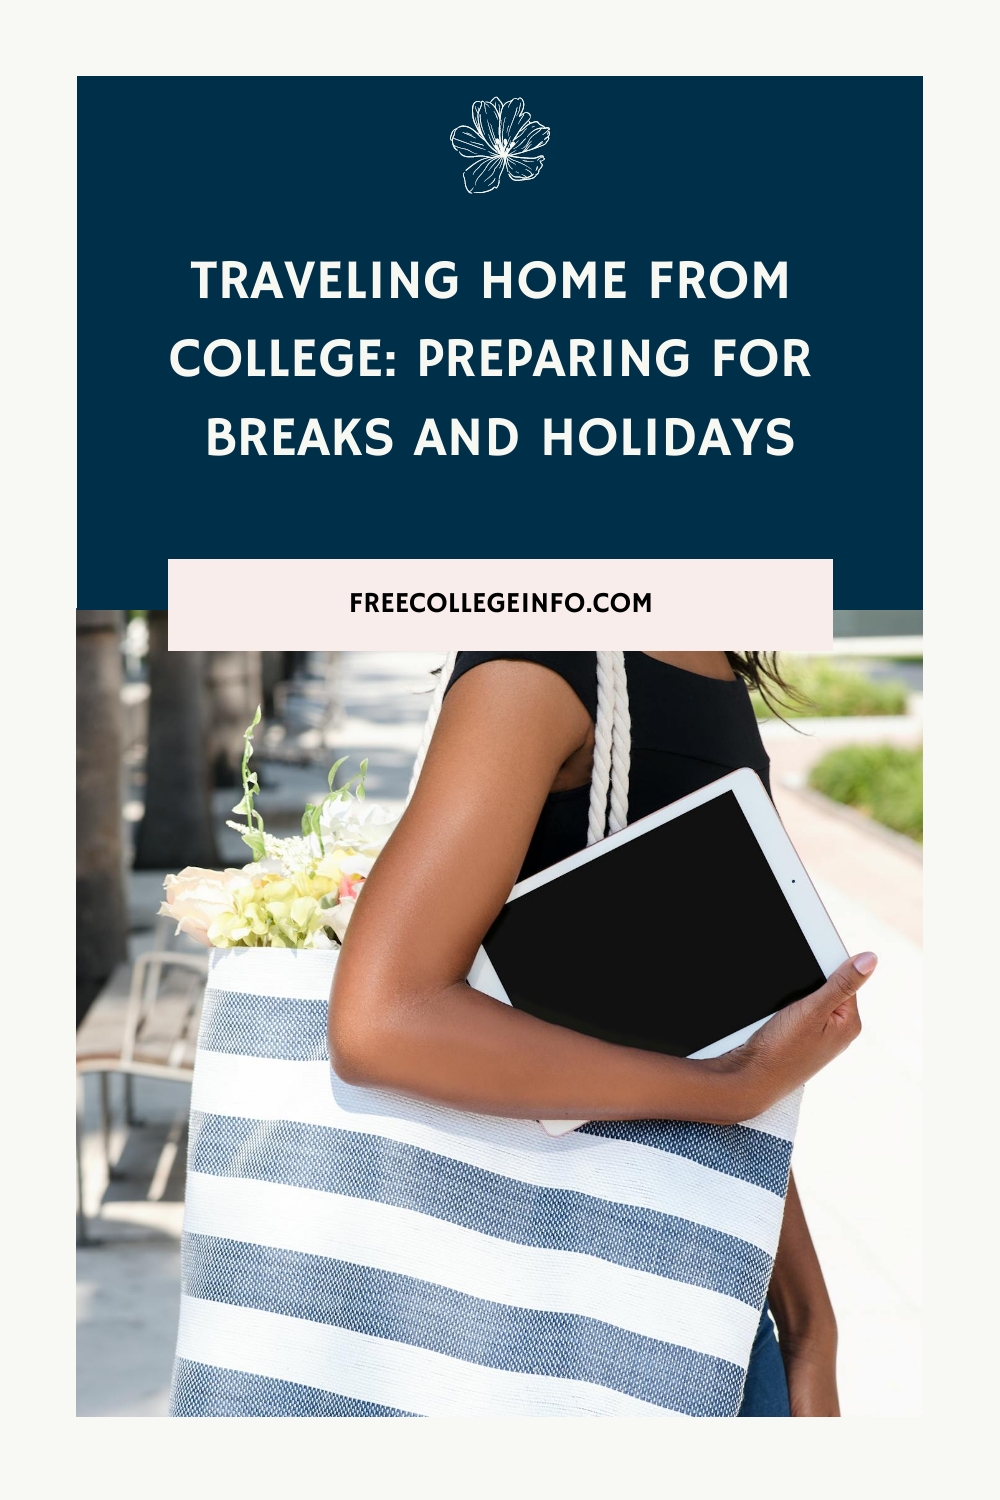 Traveling Home from College: Preparing for Breaks and Holidays